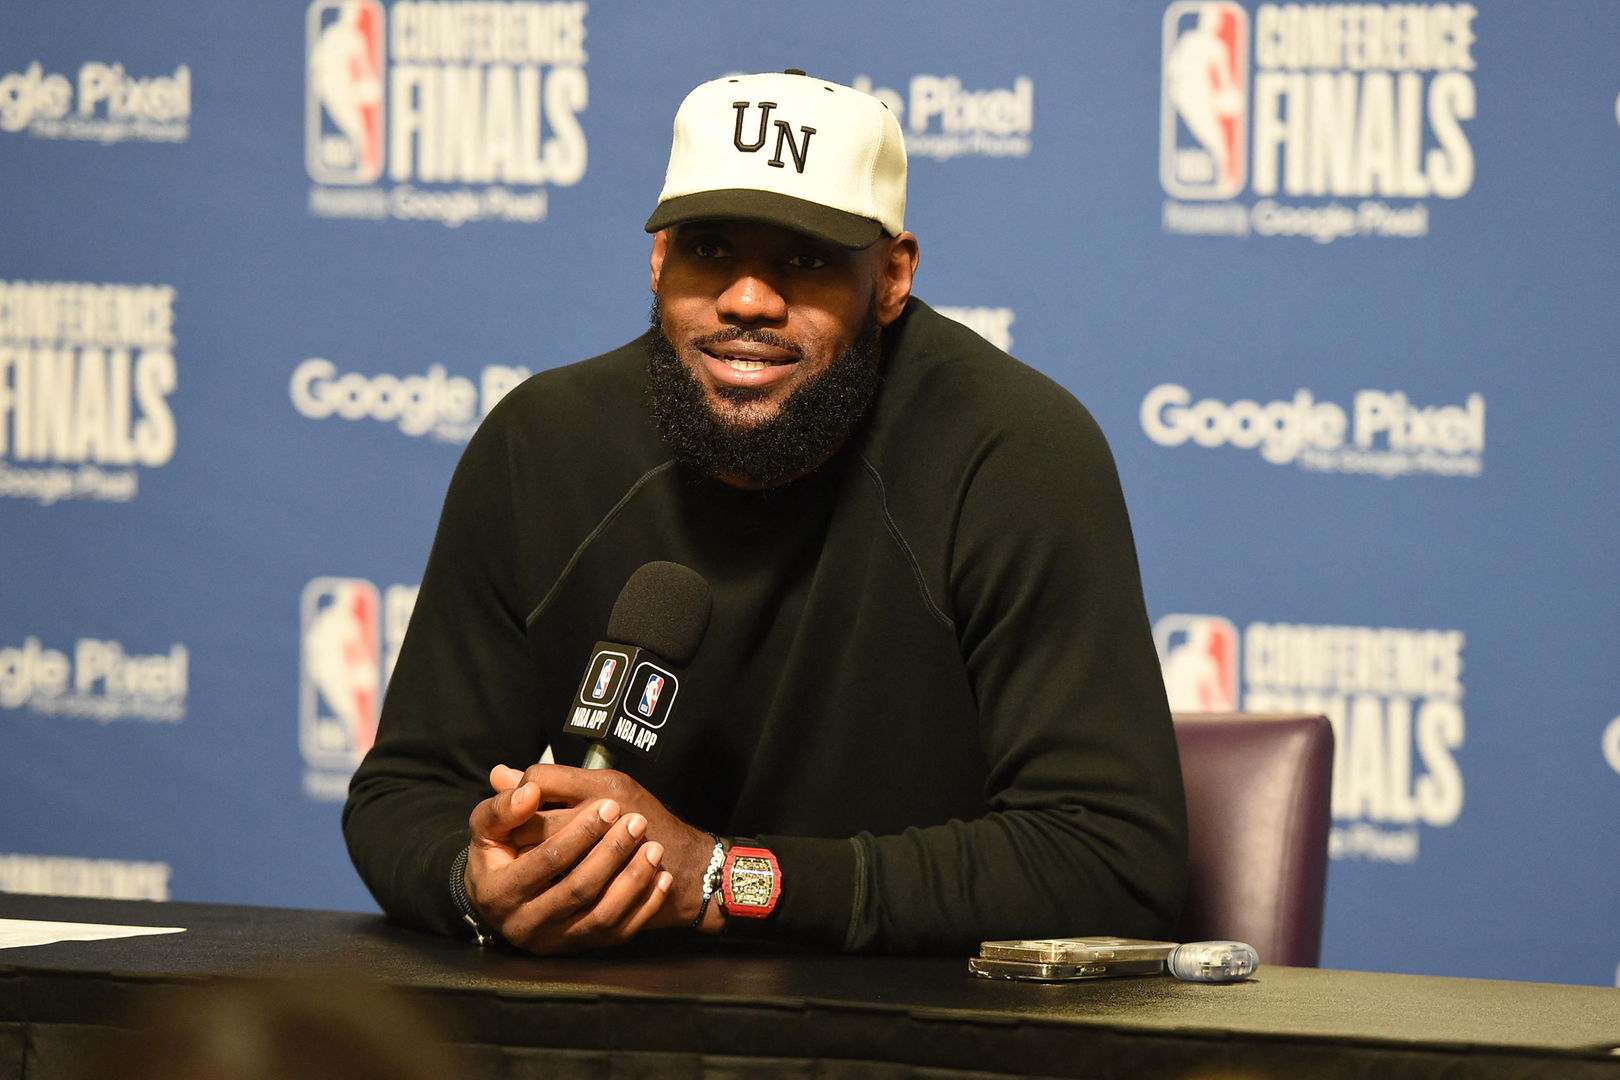 LeBron James mulling retirement after Lakers exit